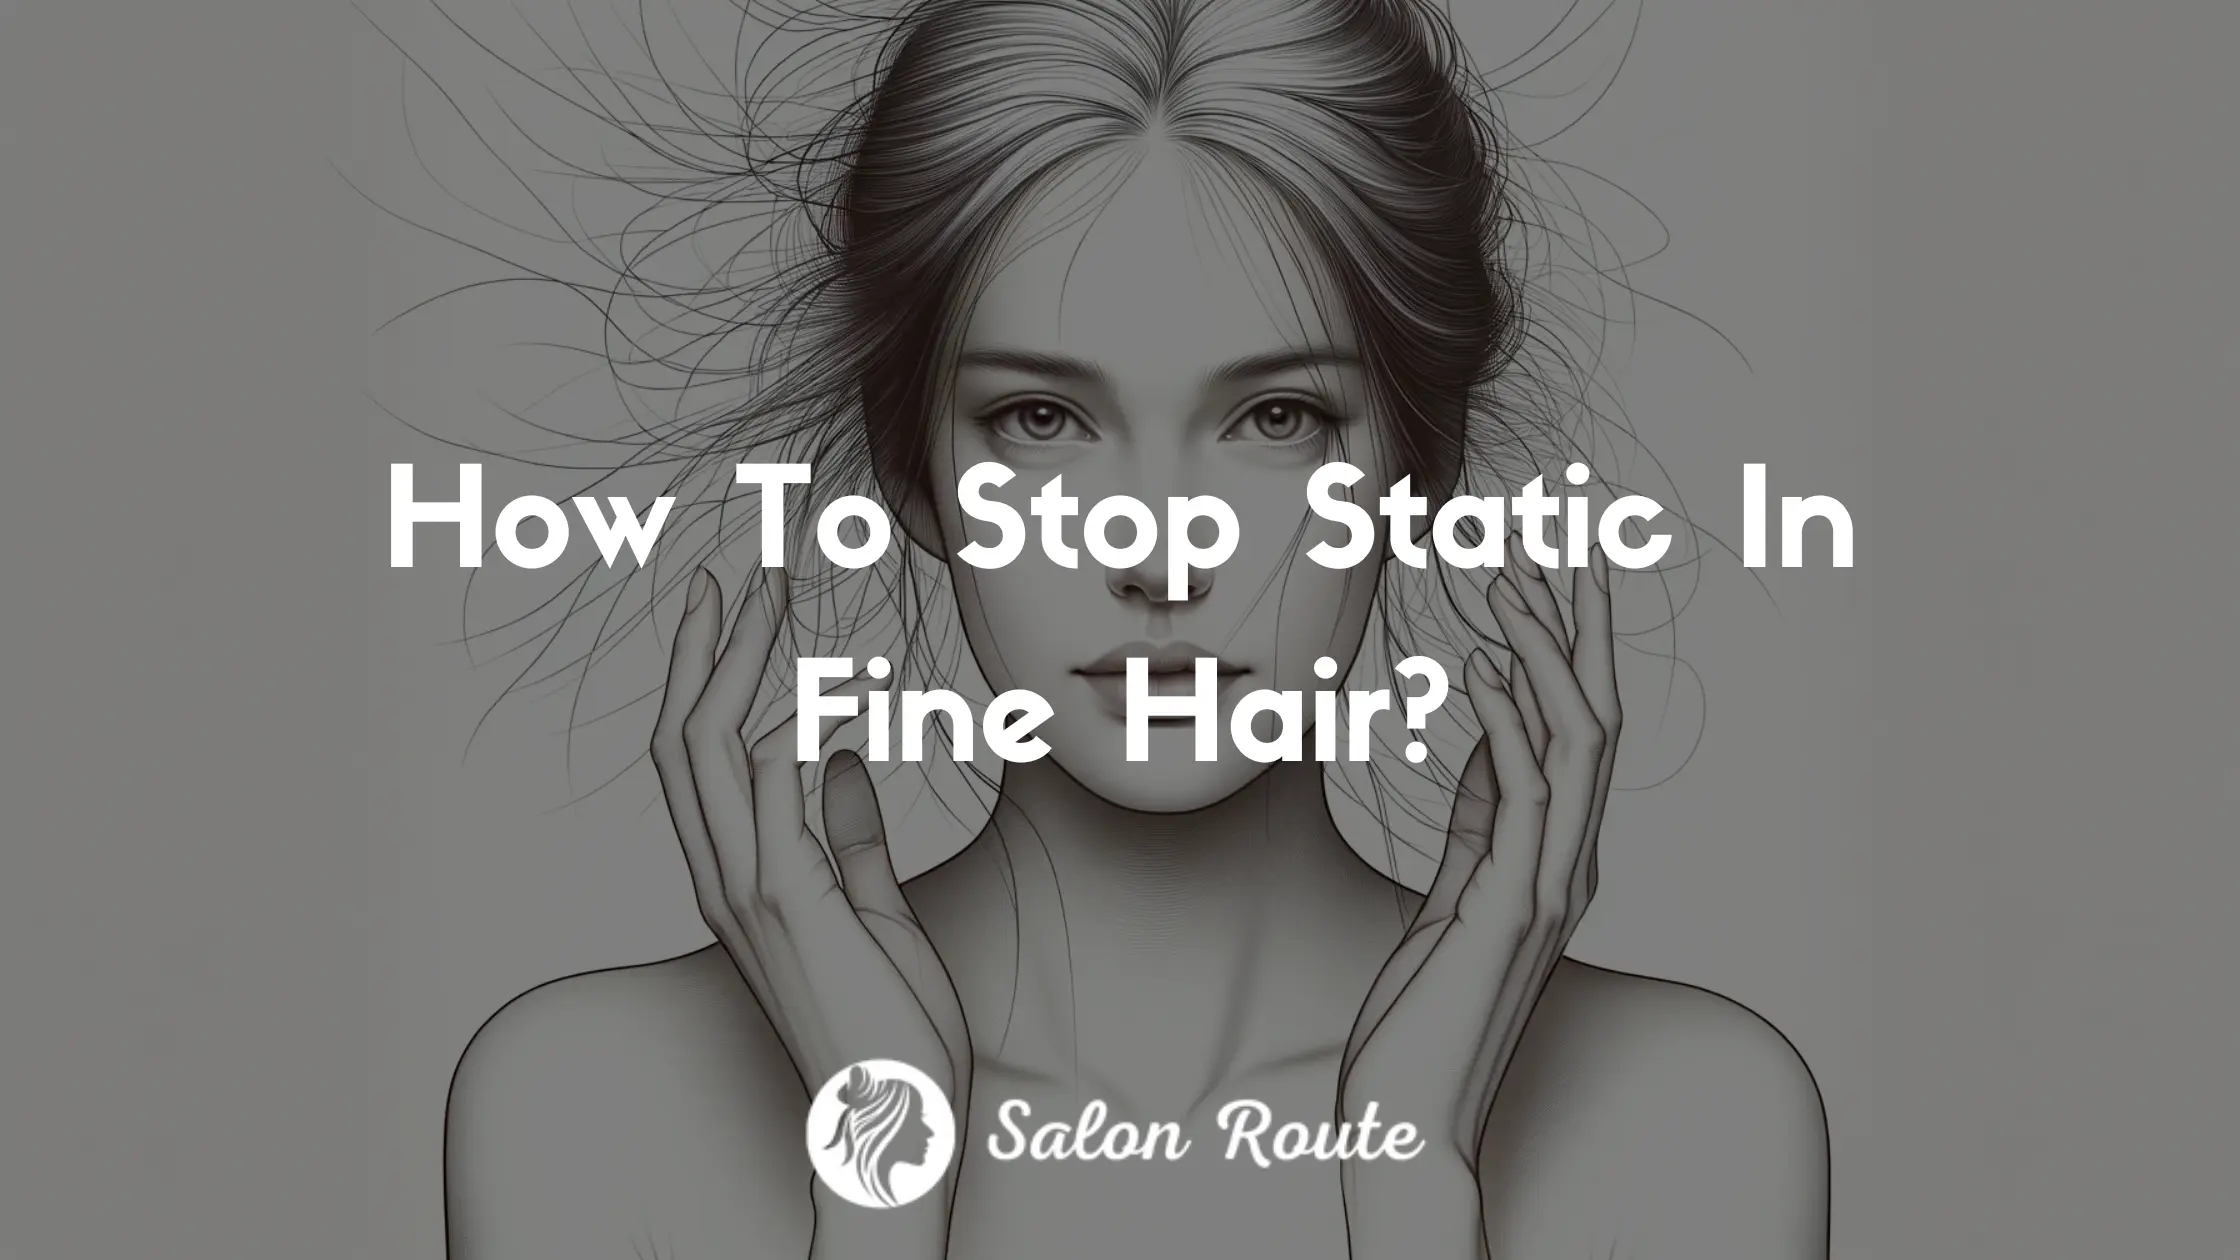 How To Stop Static In Fine Hair?